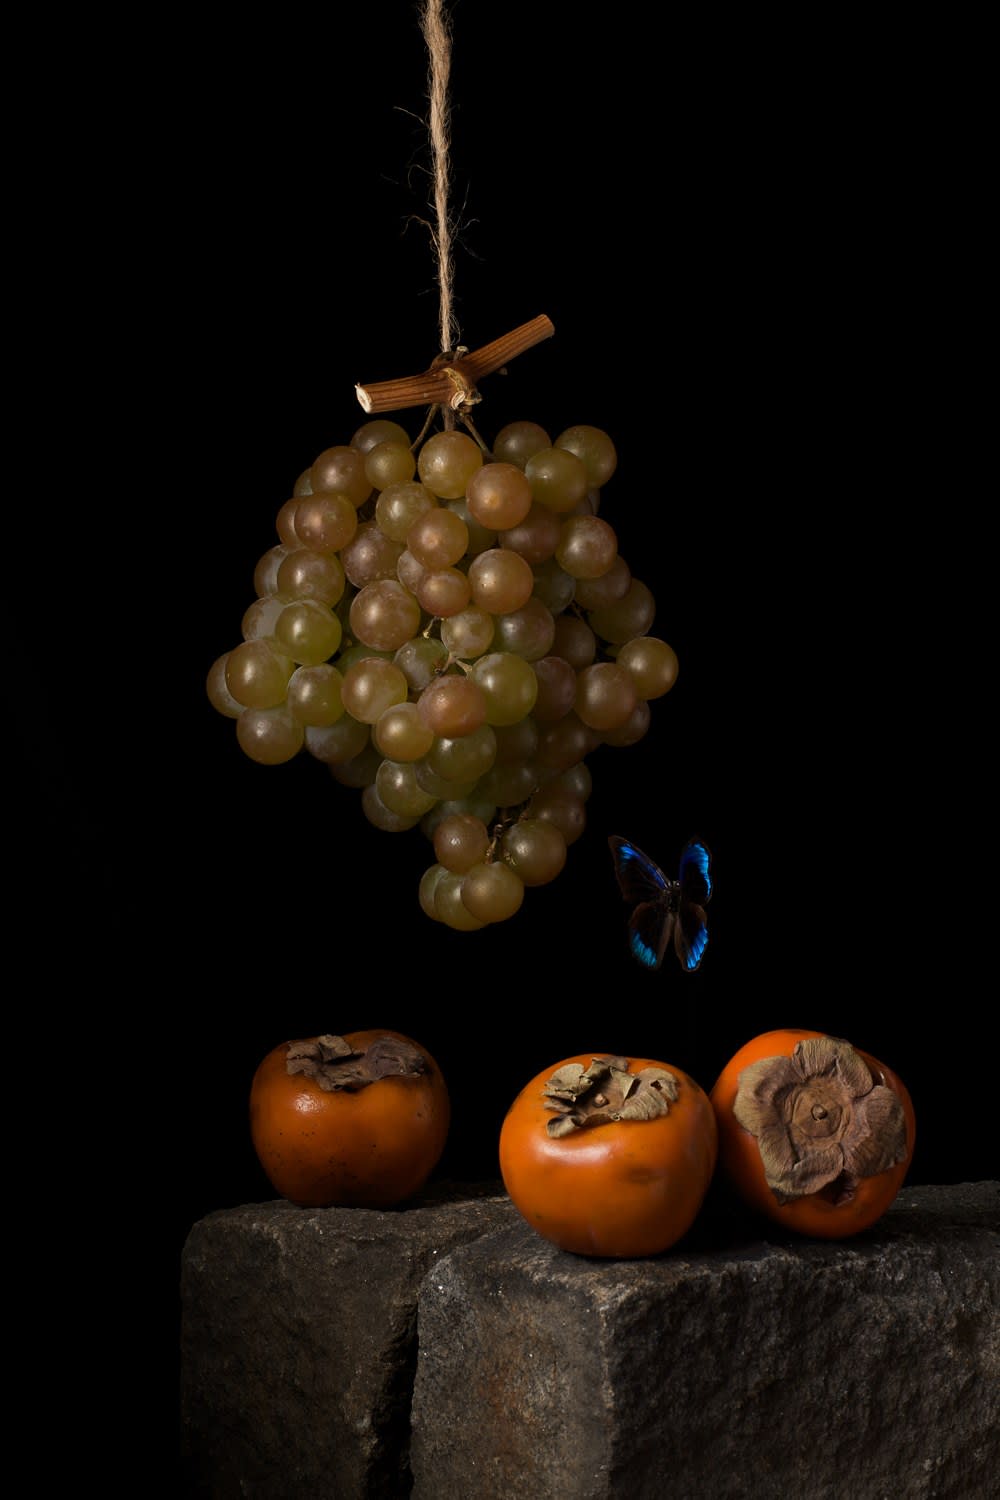 Paulette Tavormina, Persimmons, After A.C., 2009